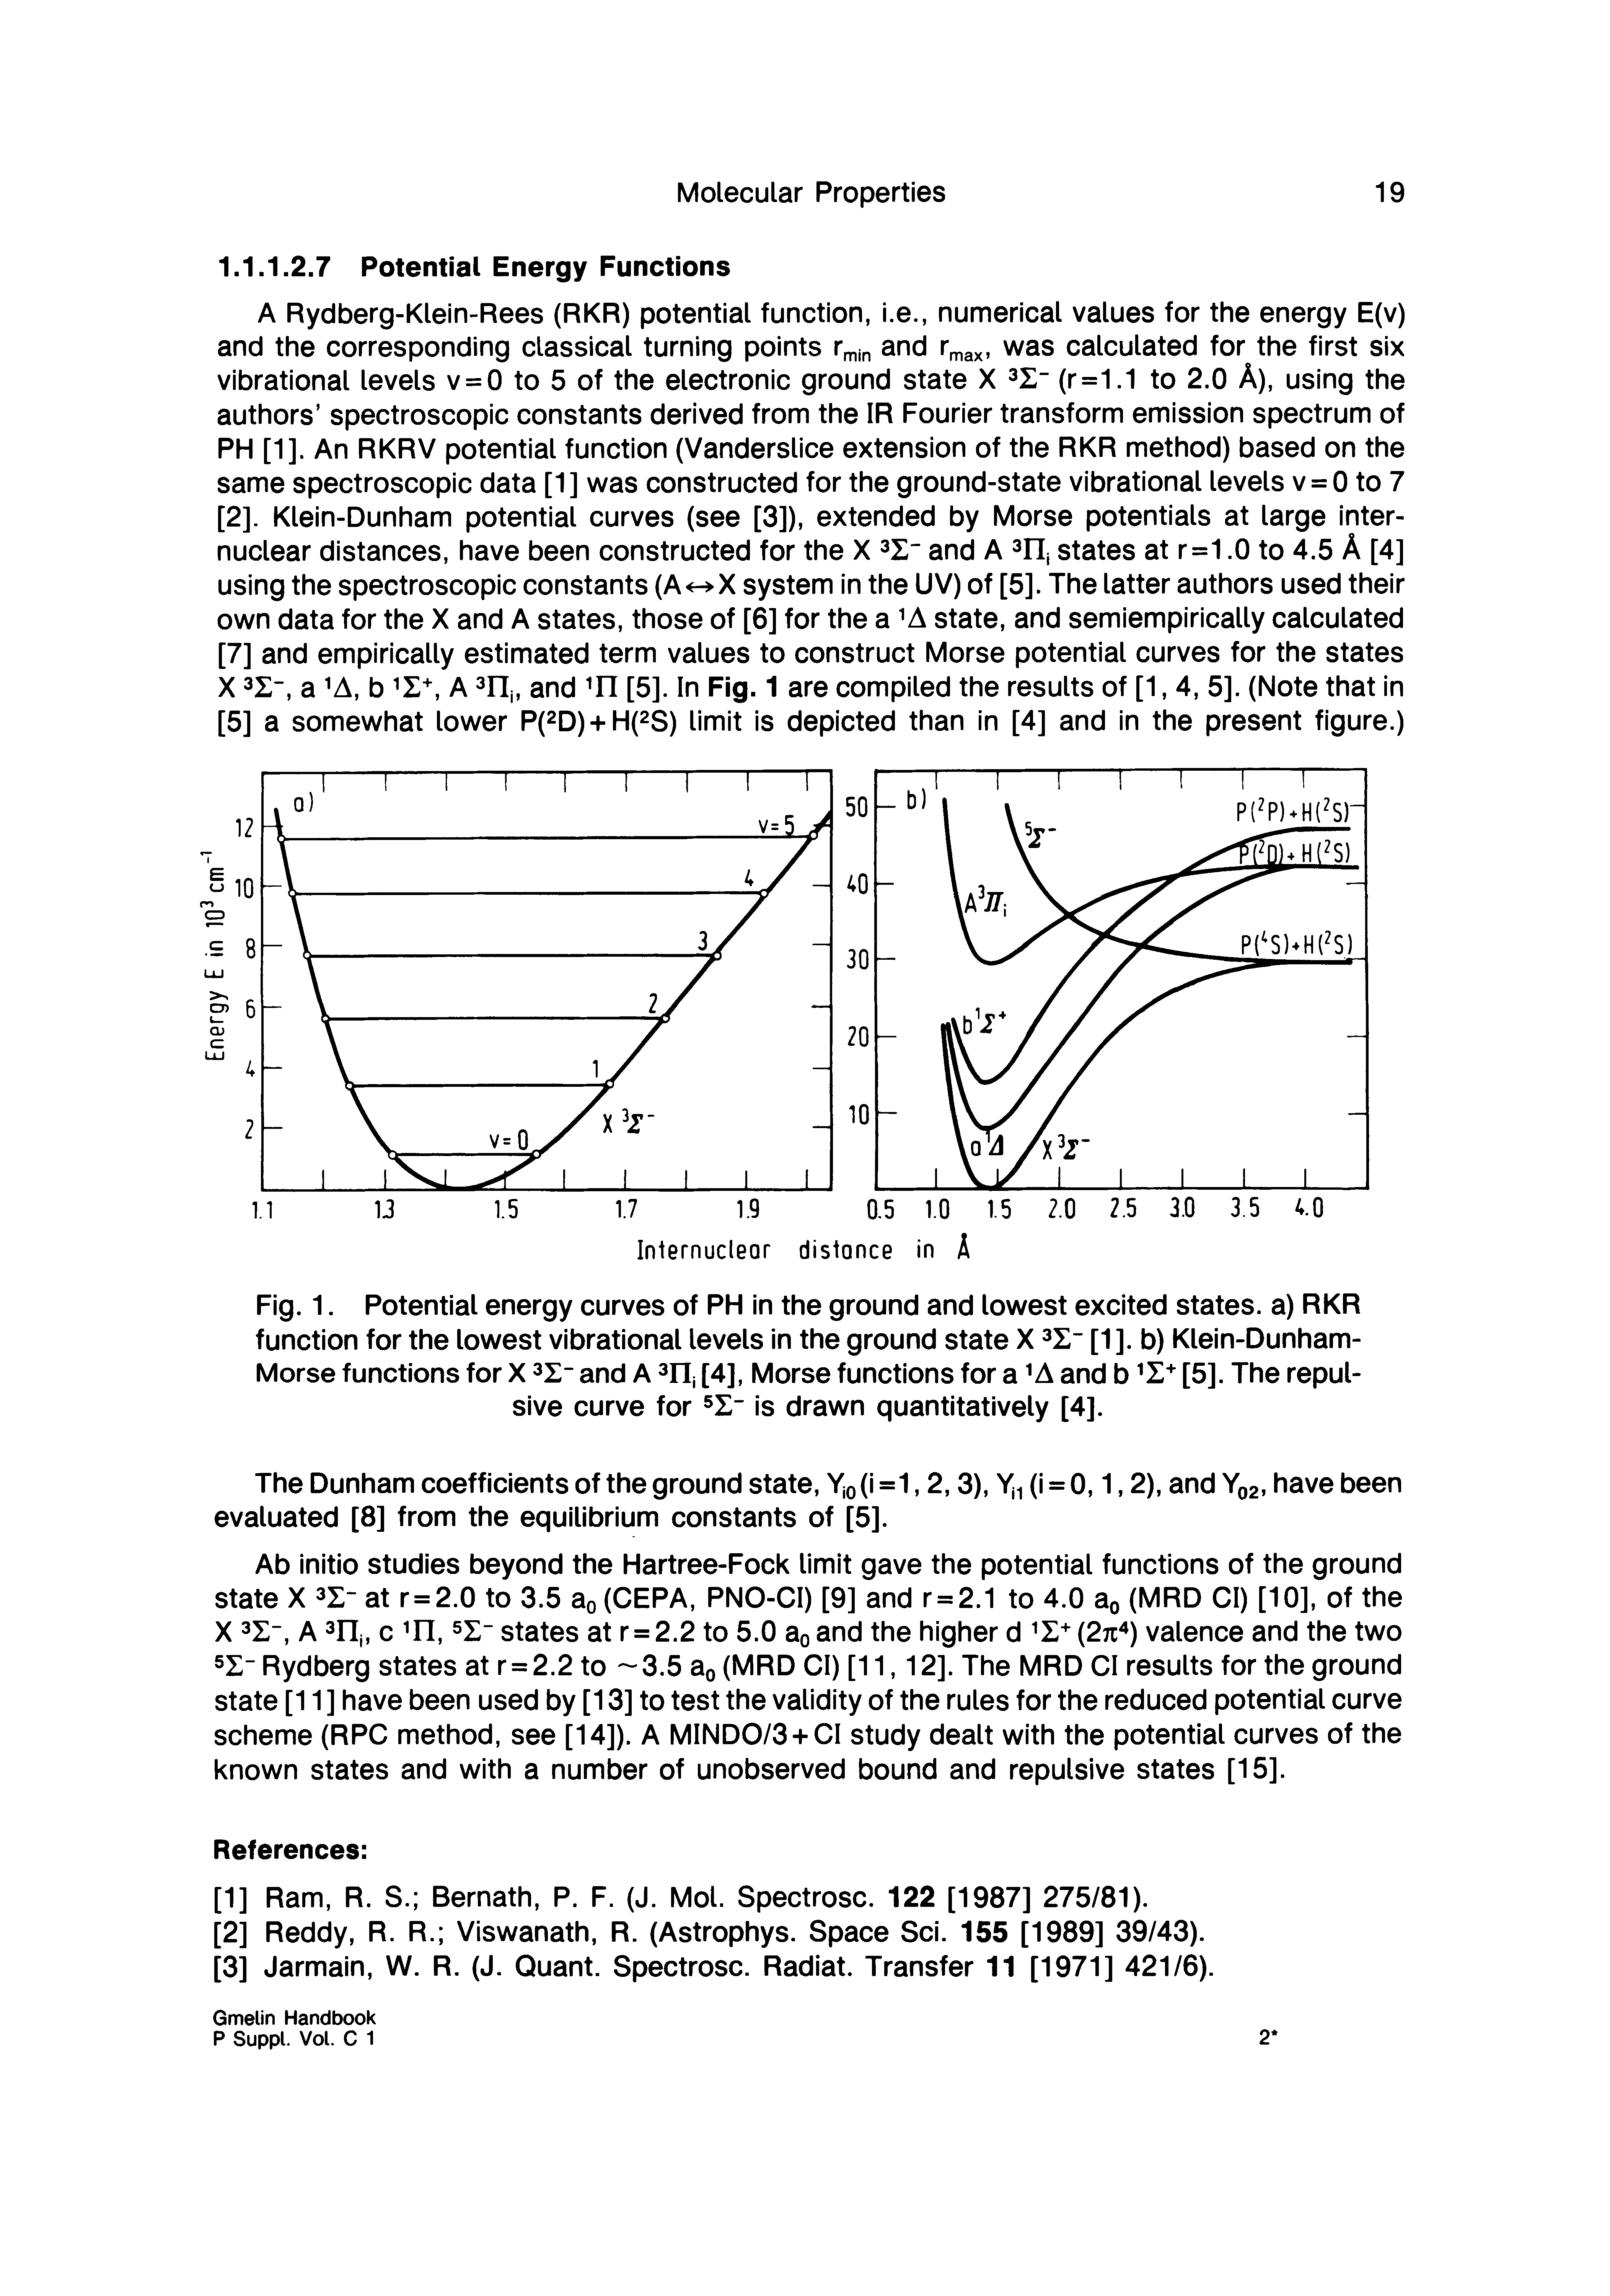 Fig. 1. Potential energy curves of PH in the ground and lowest excited states, a) RKR function for the lowest vibrational levels in the ground state X [1]. b) Klein-Dunham-Morse functions for X Z and A ITj [4], Morse functions for a A and b Z [5]. The repulsive curve for is drawn quantitatively [4].